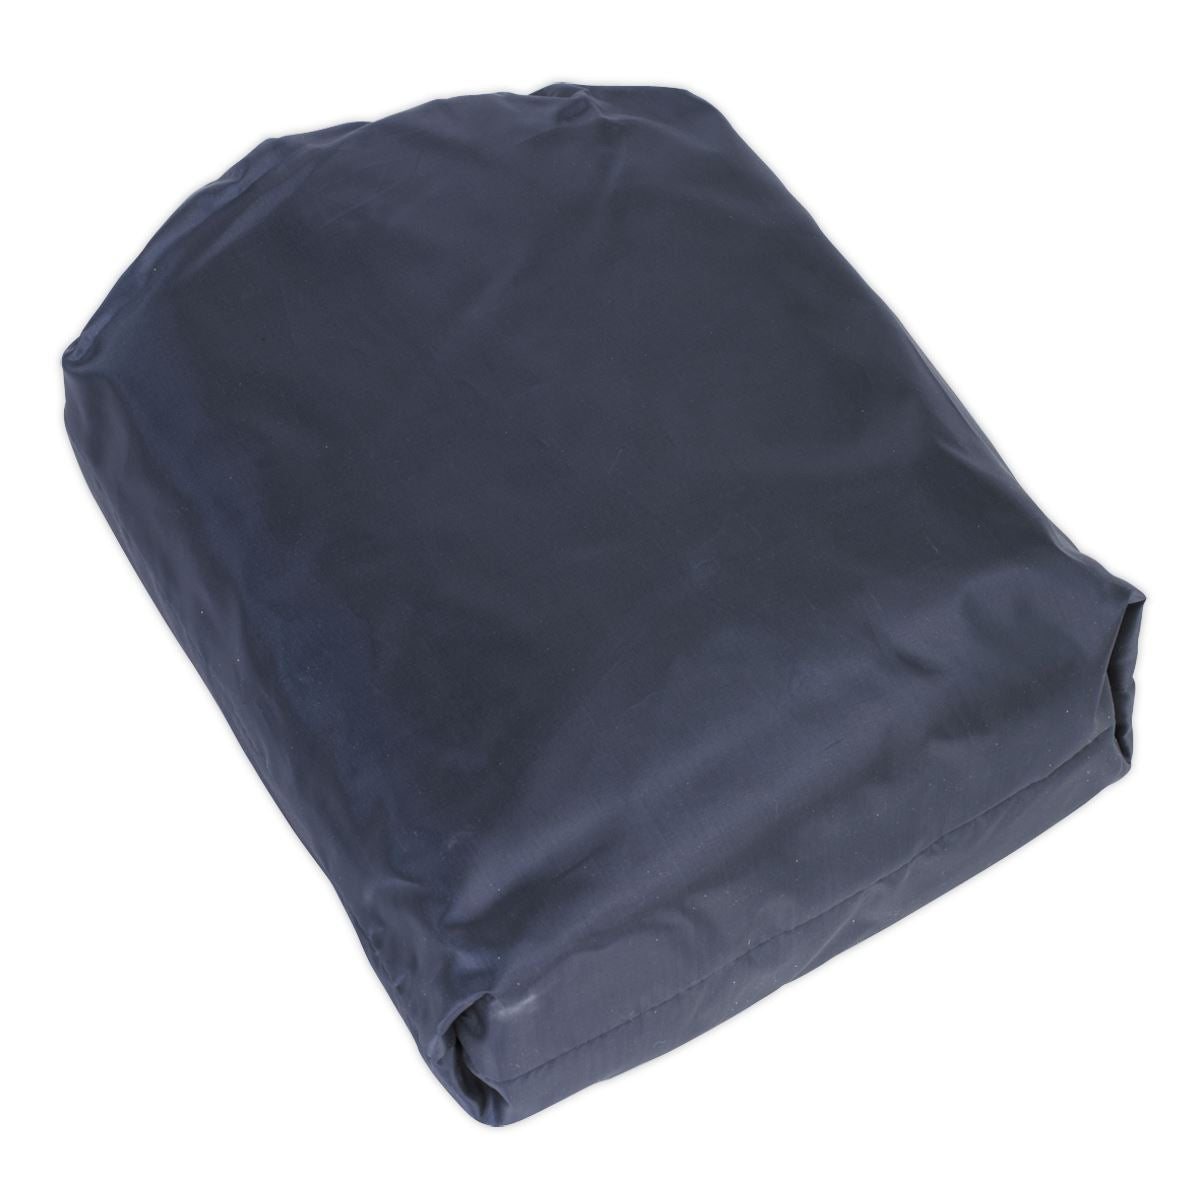 Sealey Car Cover Lightweight Large 4300 x 1690 x 1220mm